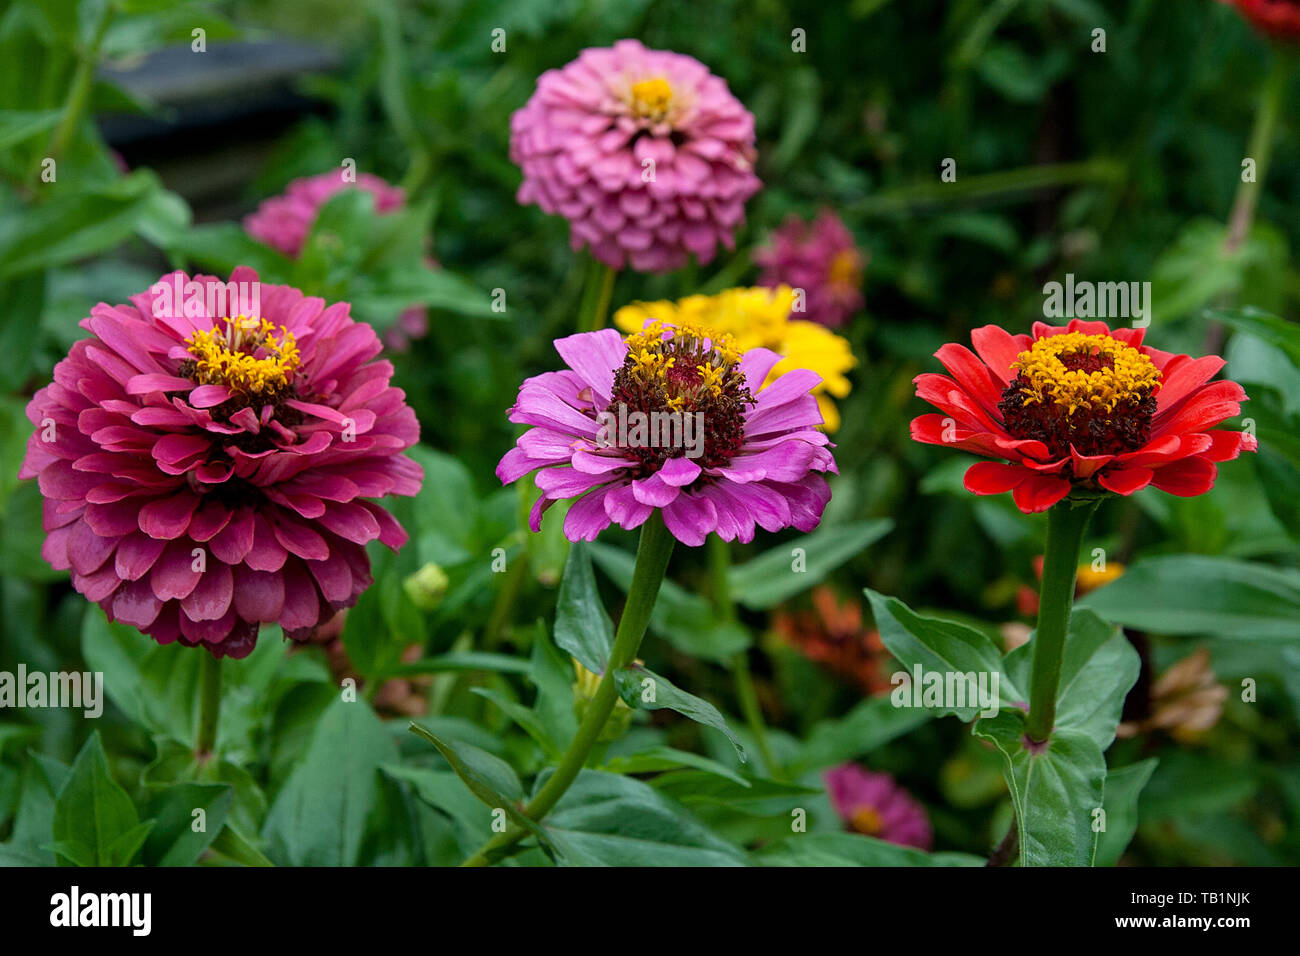 Beautiful Zinnia Flowers On Green Leaf Background Close Up View Of Zinnia Flowers In The Summer Garden Stock Photo Alamy